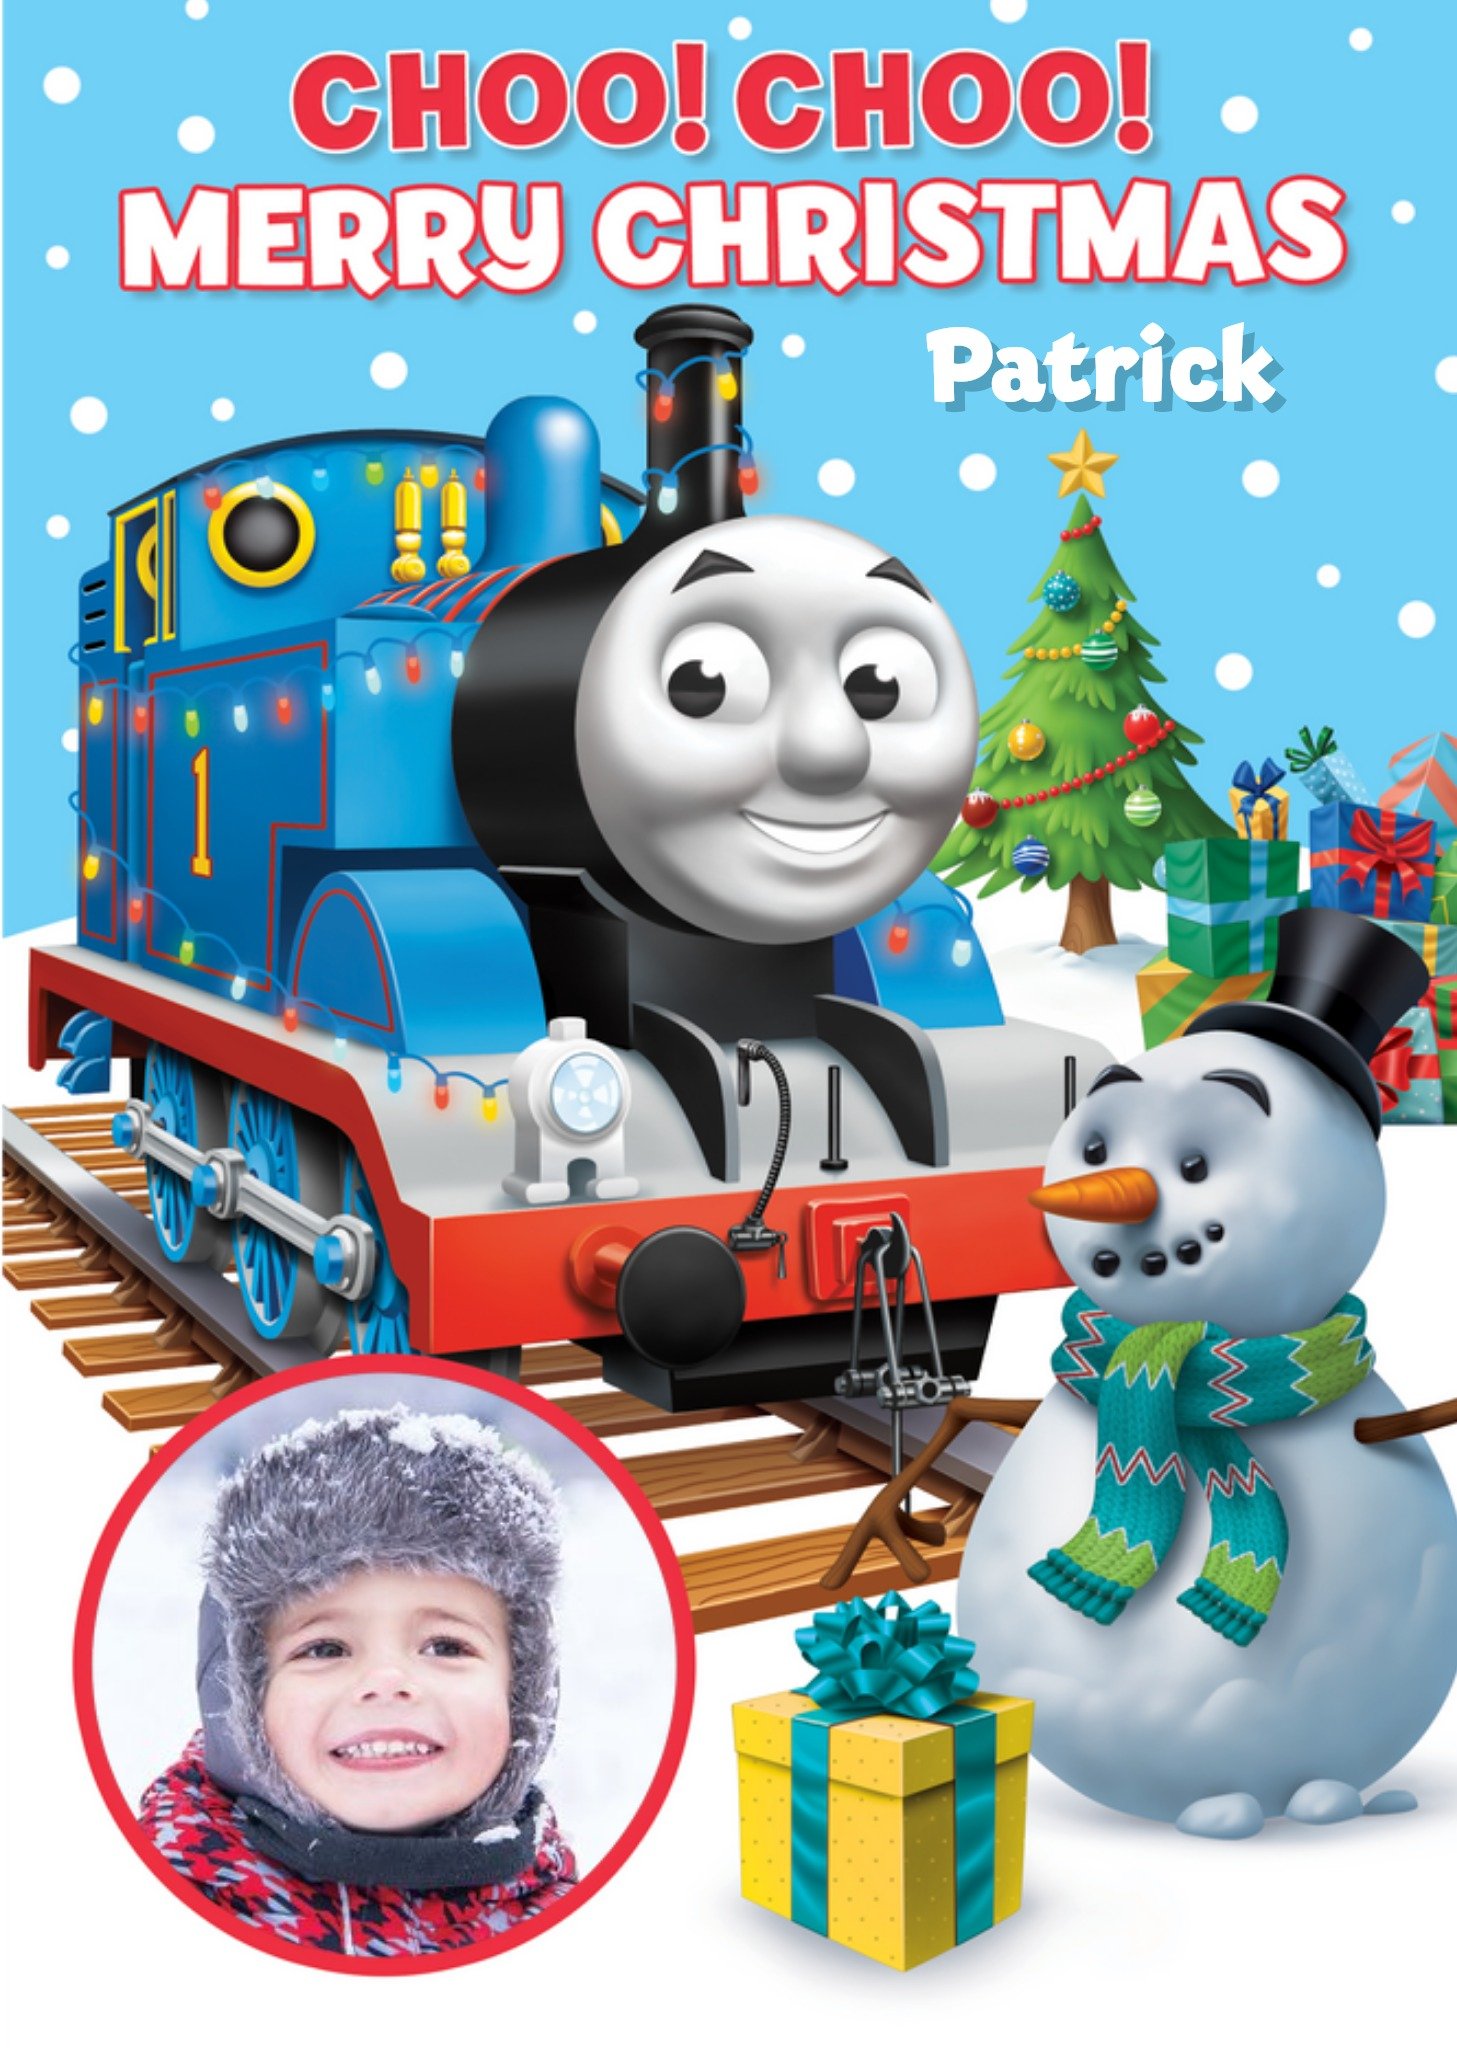 Thomas & Friends Thomas And Friends Photo Upload Christmas Card, Large